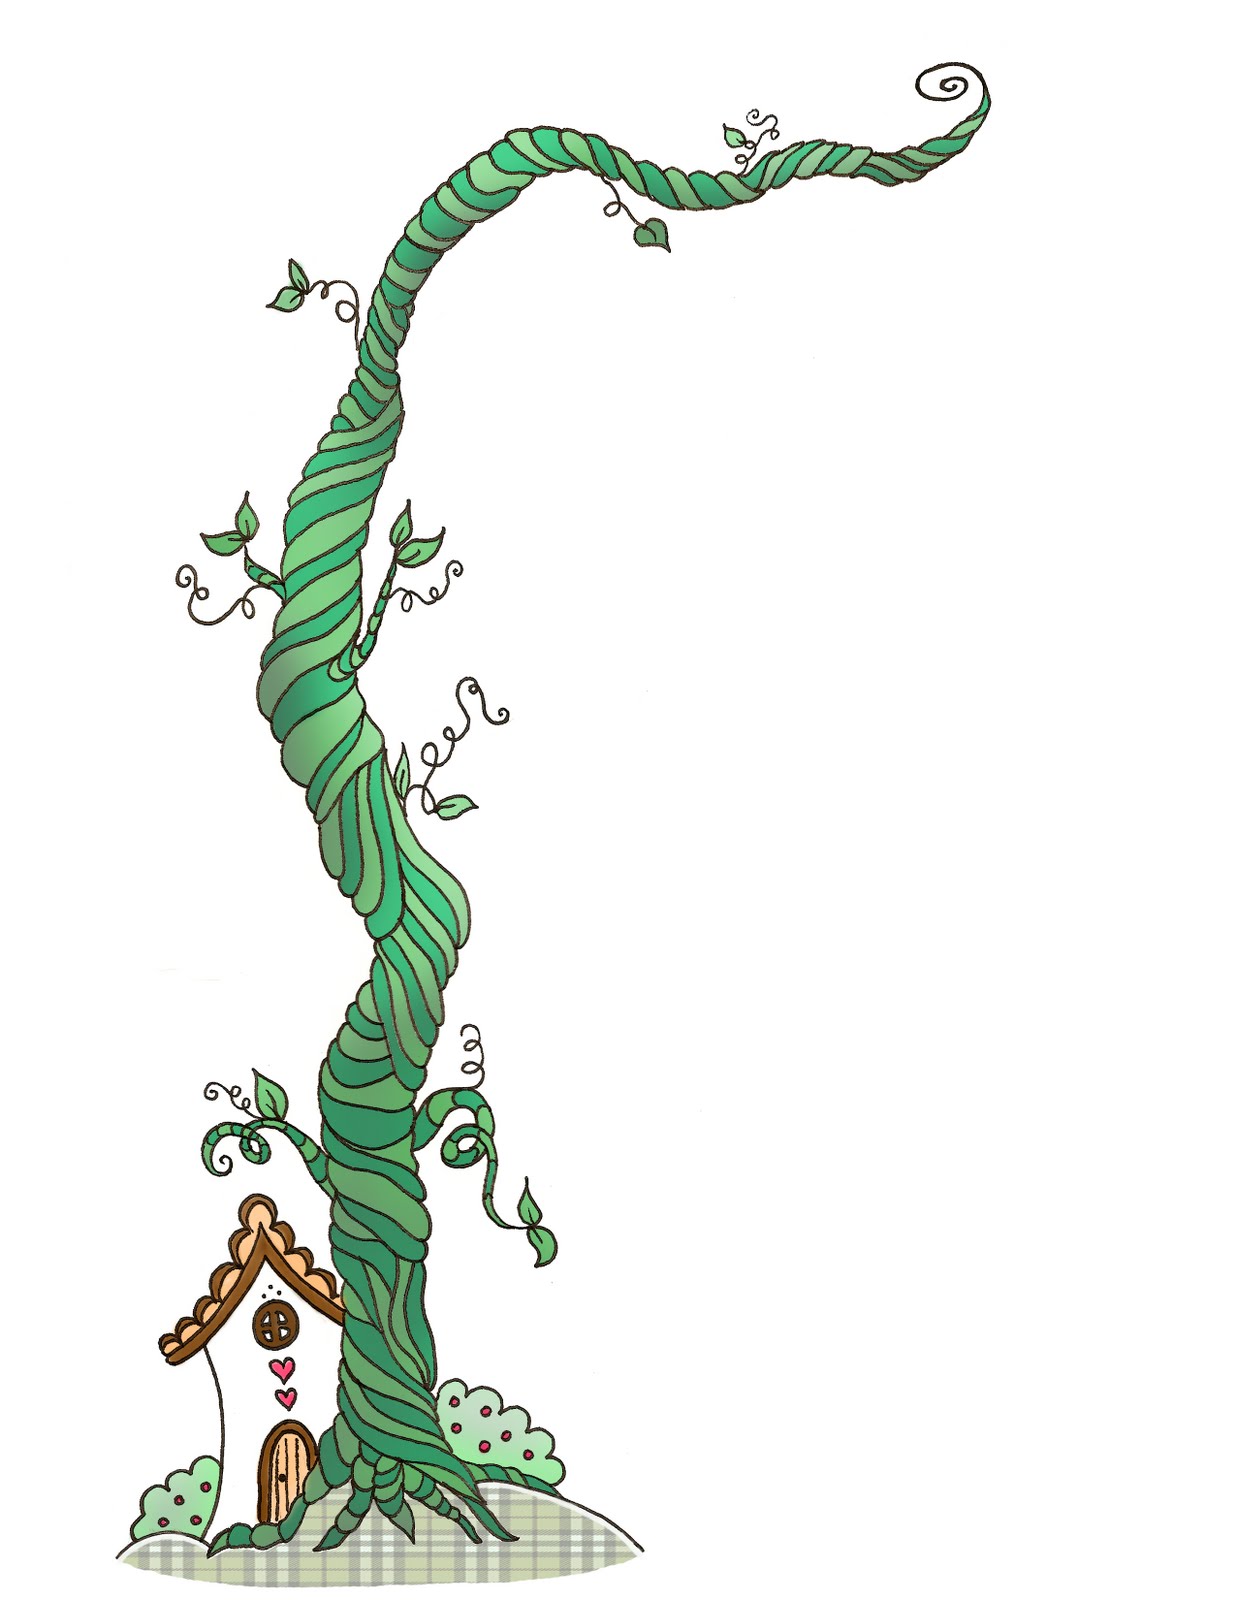 Jack From Jack And The Beanst - Beanstalk Clipart